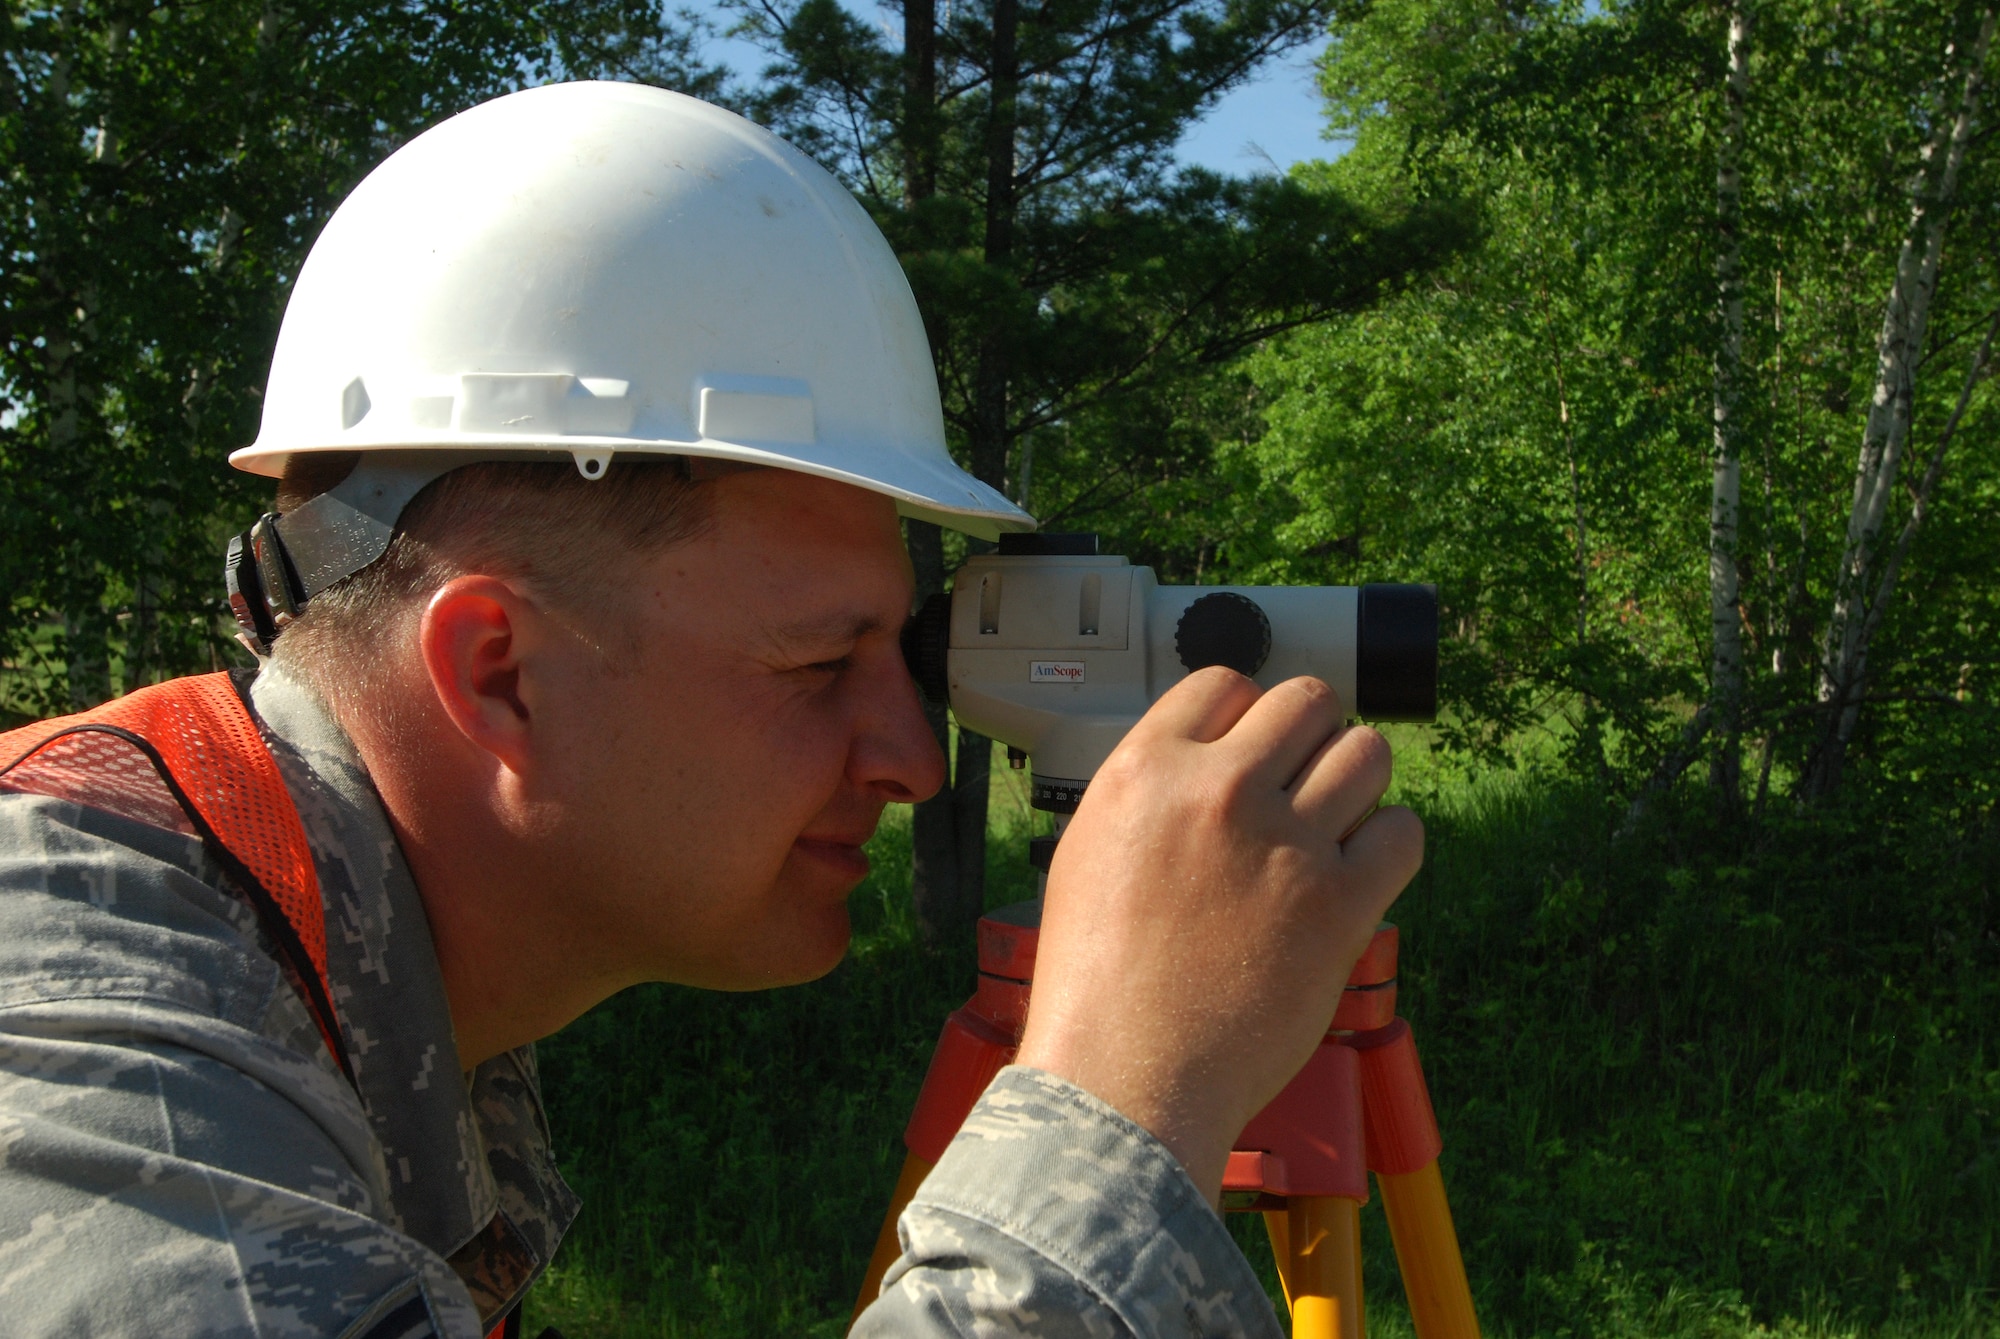 Members of the 433rd Civil Engineering Squadron conduct a humanitarian mission in the Red Lake Indian Reservation for the Red Lake band of Chippewa Indians, just outside of Bemidji, Minnesota. Staff Sgt. Chris Gregory, 433rd CES, shoots grade to make sure the 12-inch water pipe in a 10-foot deep ditch next to him is at the proper depth. (U.S. Air Force photo/Airman 1st Class Brian McGloin)